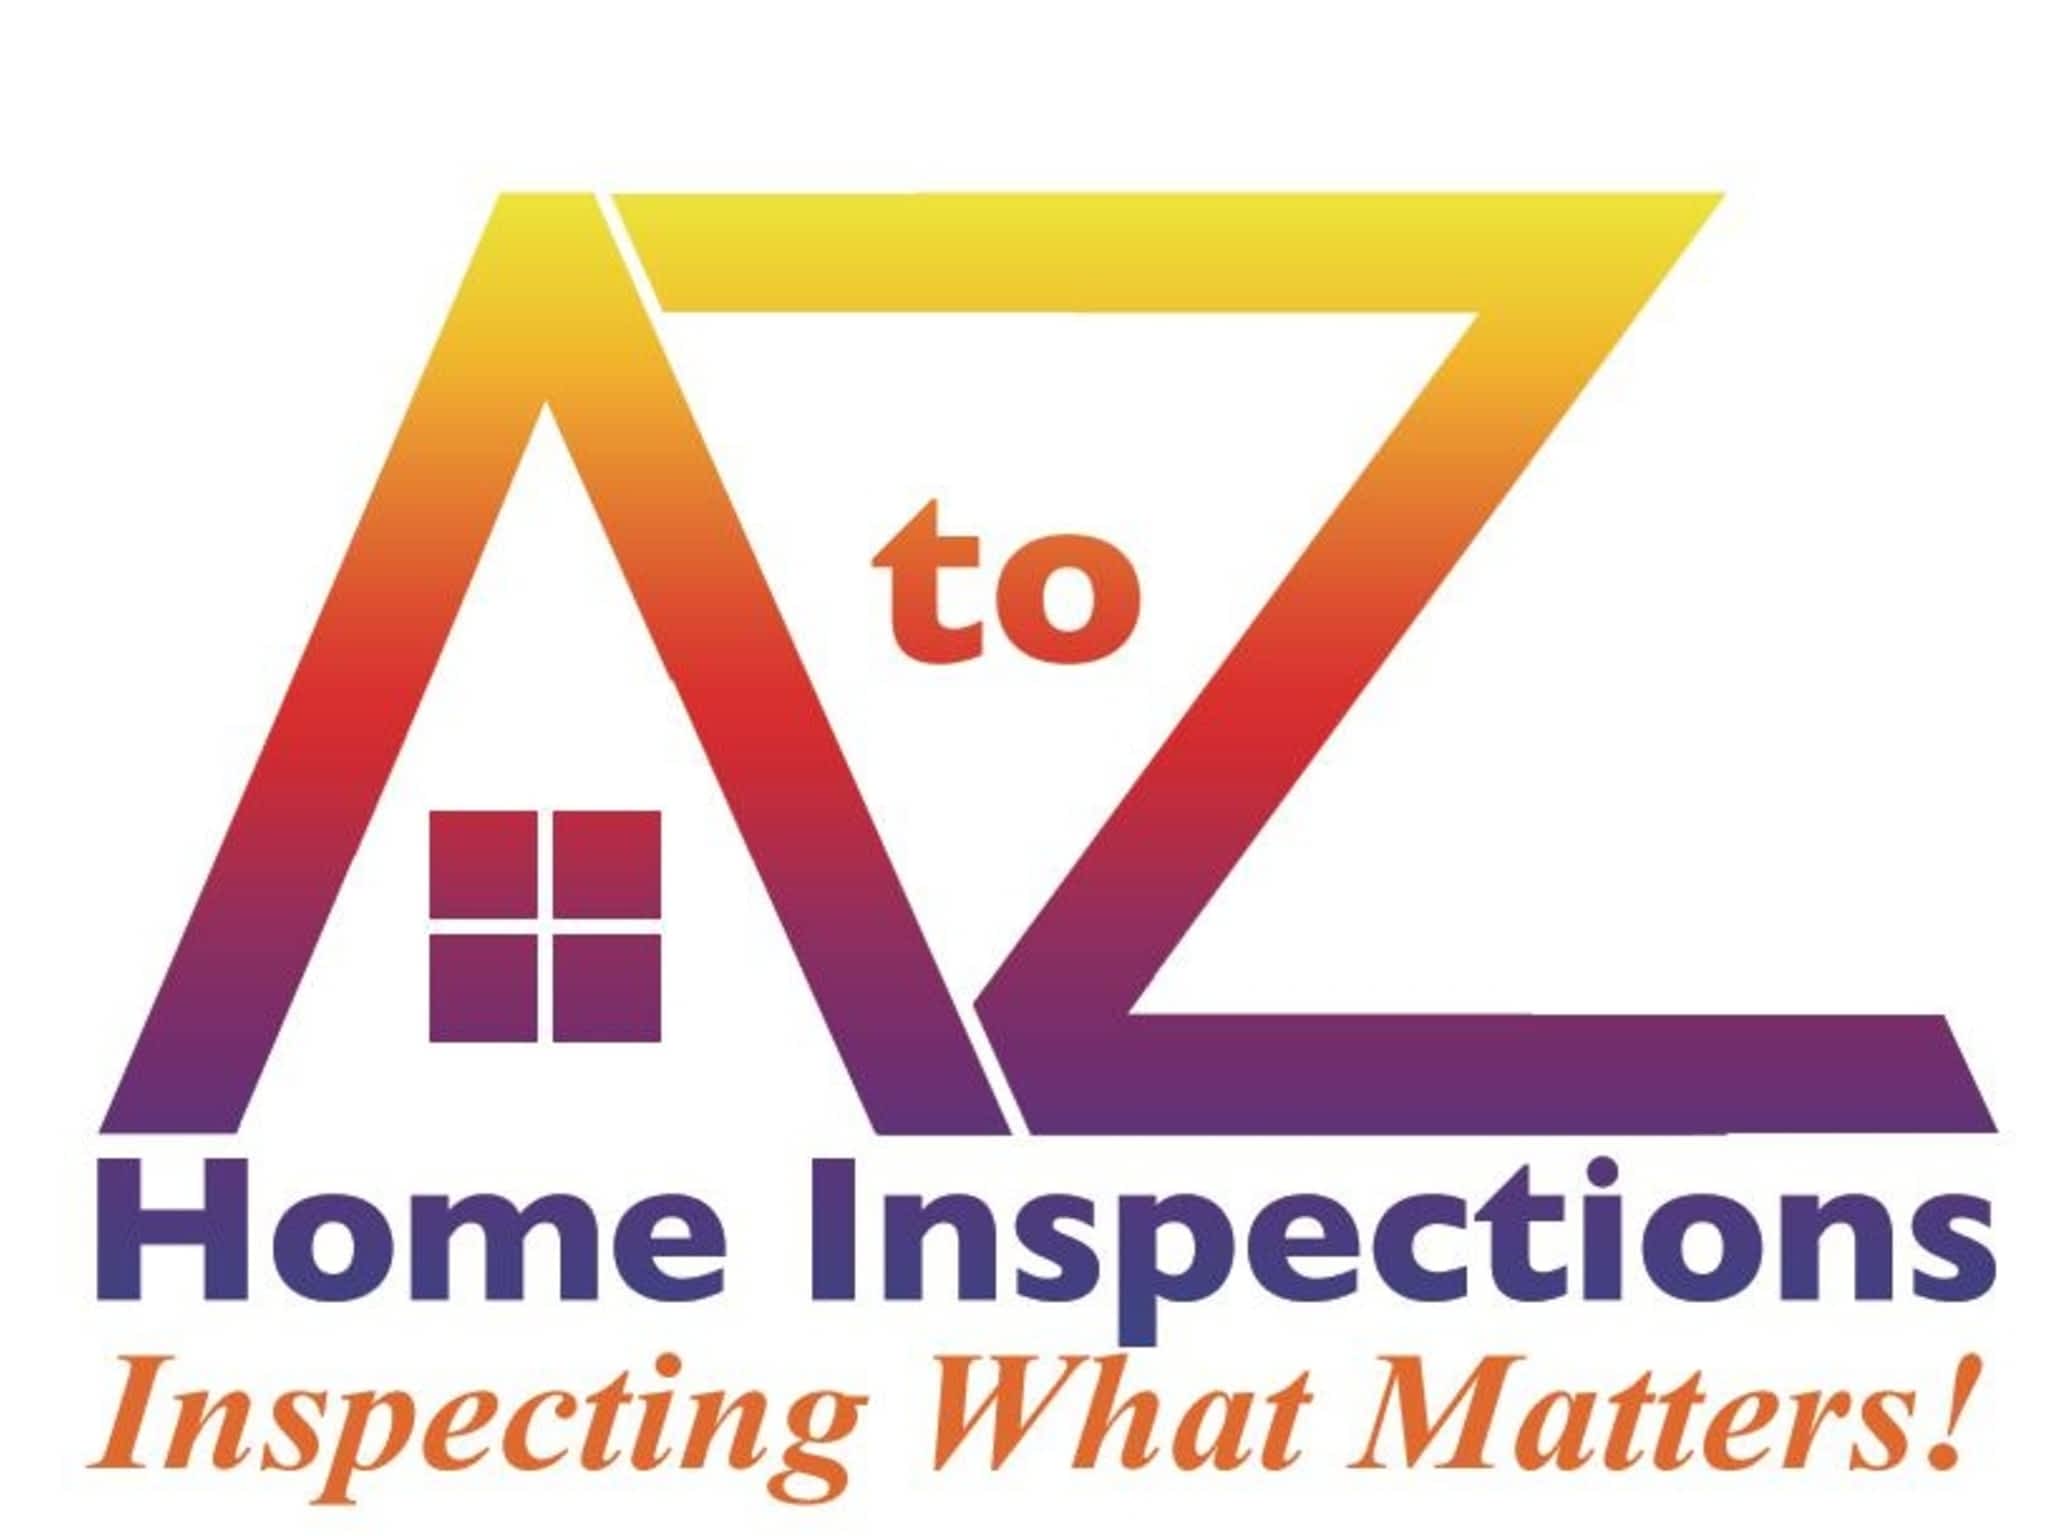 photo A to Z Home Inspections